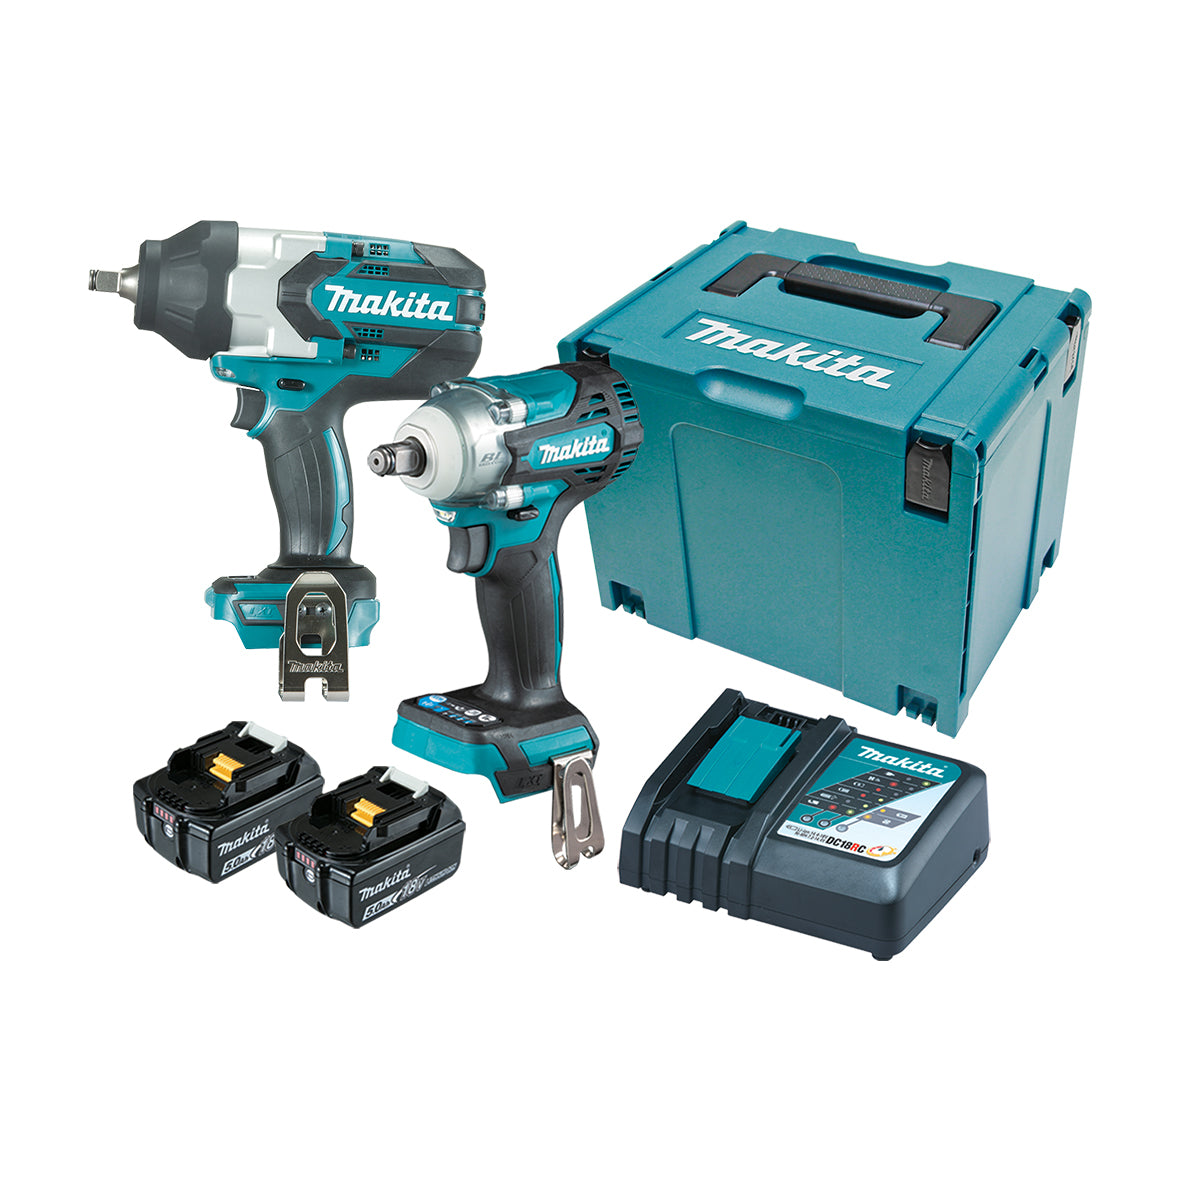 18V 5.0Ah 2Pce Brushless 1/2" Impact Wrench + 1/2" Compact Impact Wrench Kit DLX2371TJ by Makita